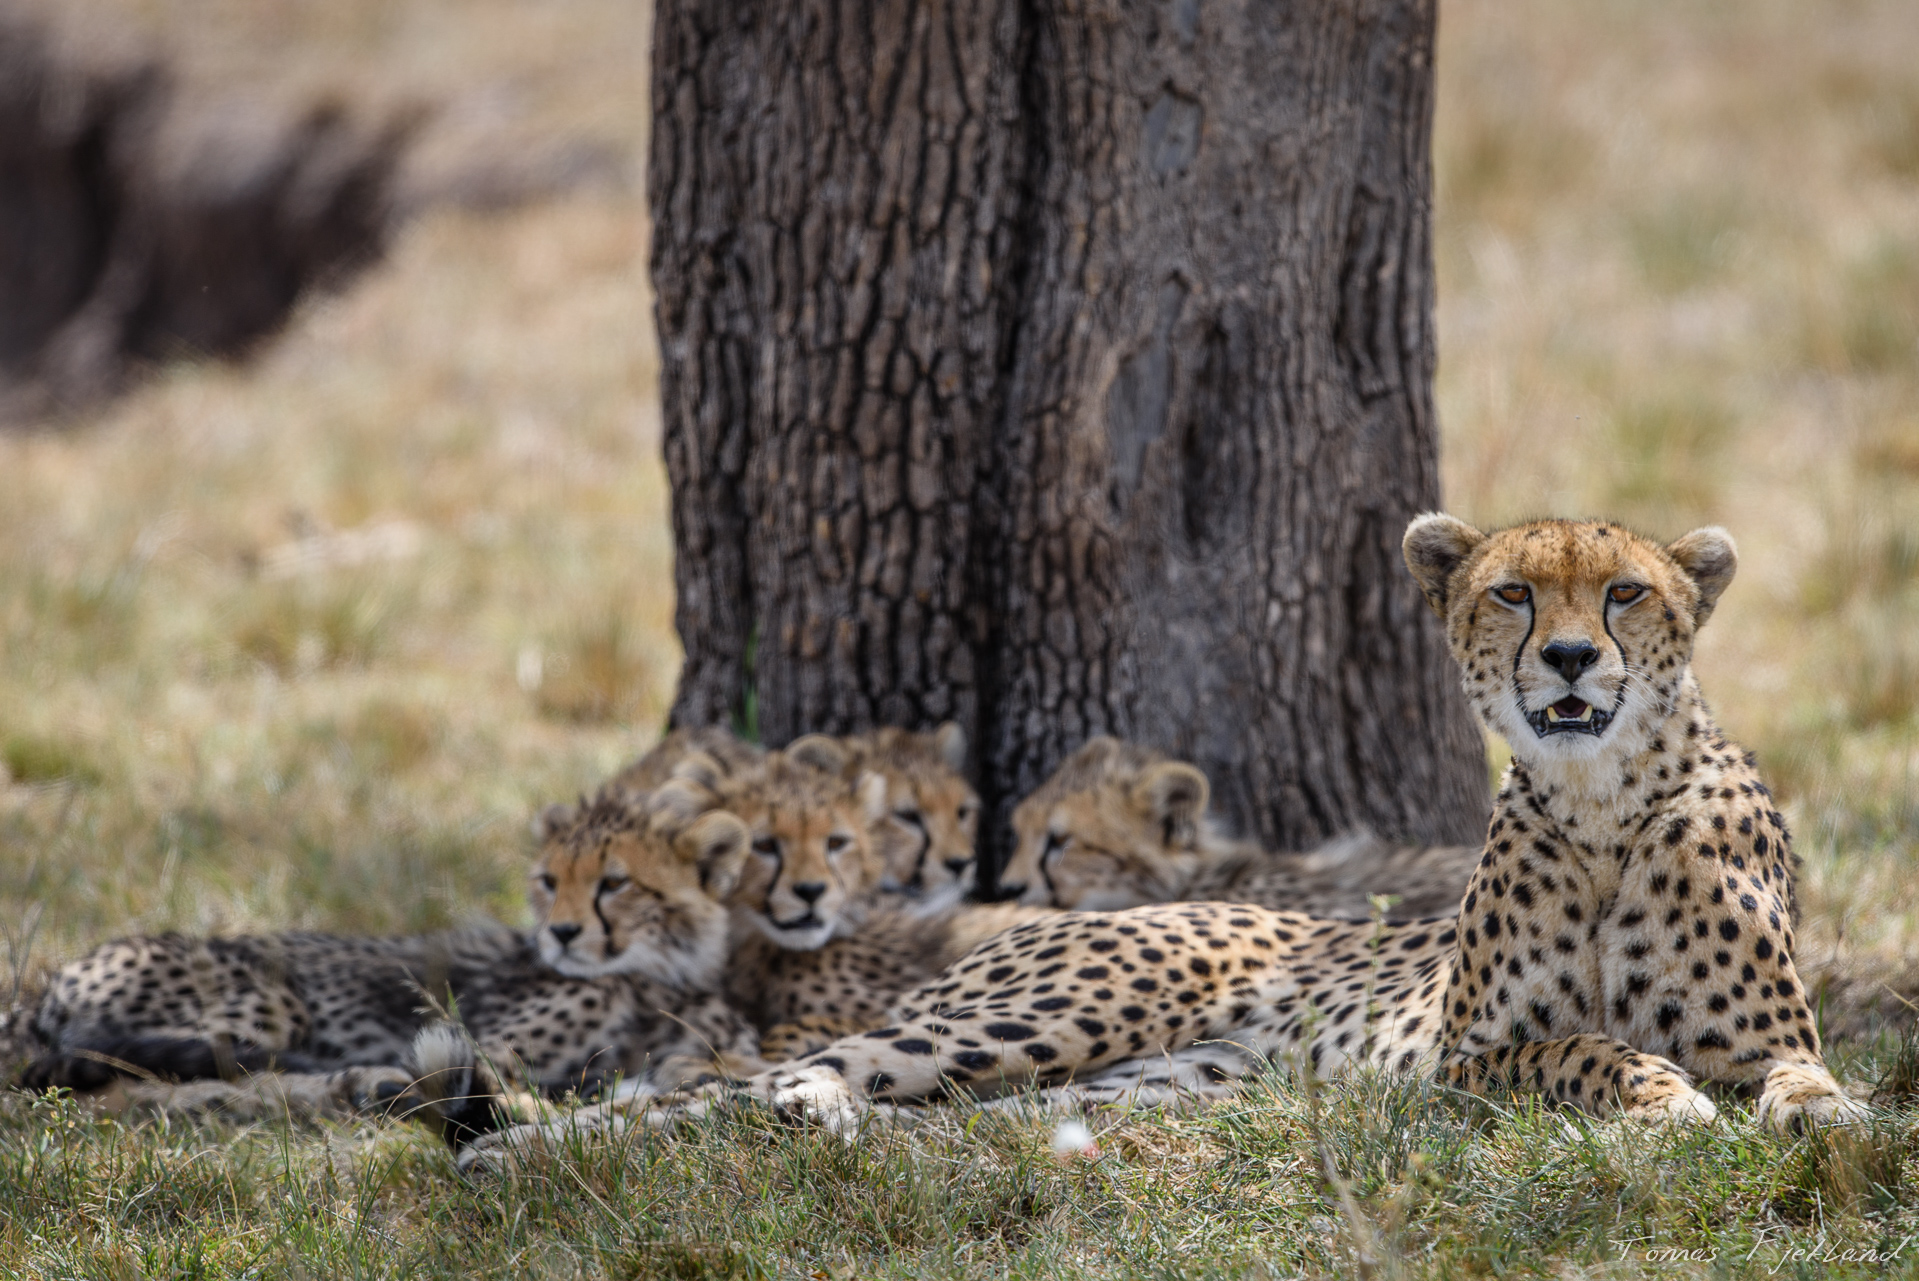 While she gave birth to six cubs, having brought 5 to this age is quite an unusual accomplishment for cheetahs.